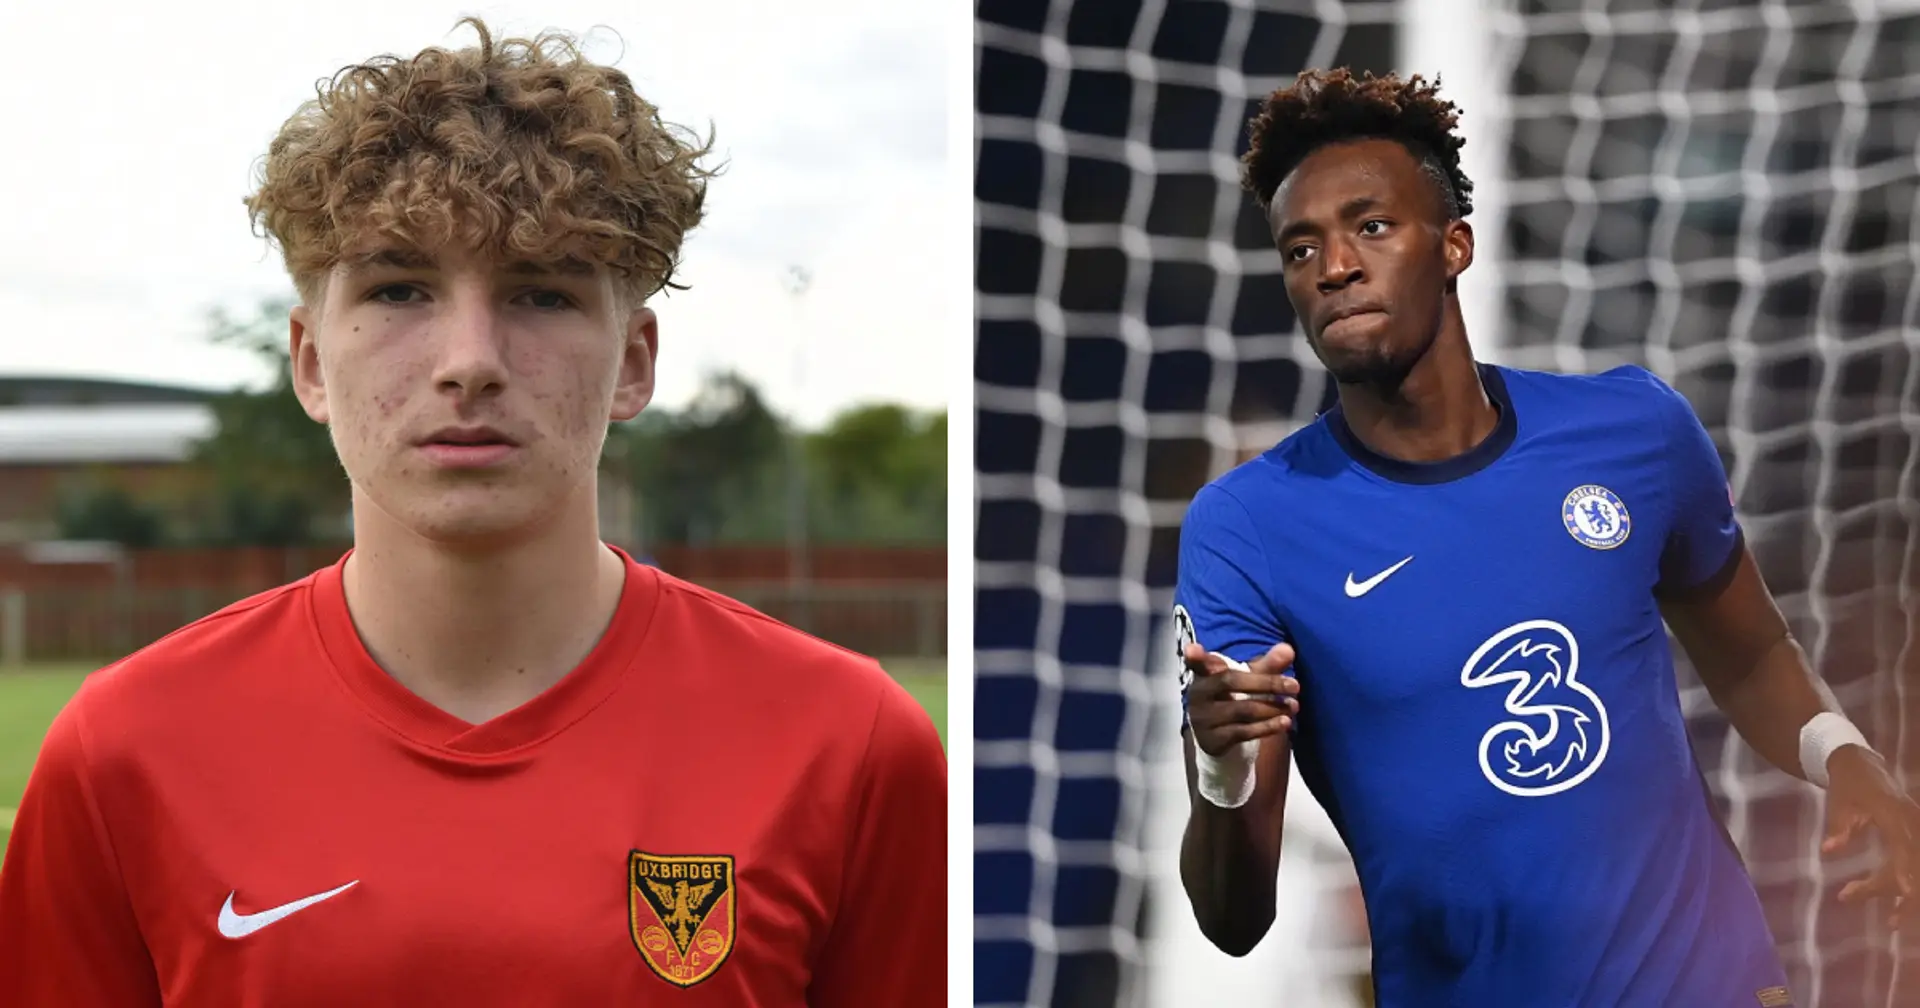 Interest in non-league starlet, Abraham could leave: latest Chelsea transfer round-up with probability ratings